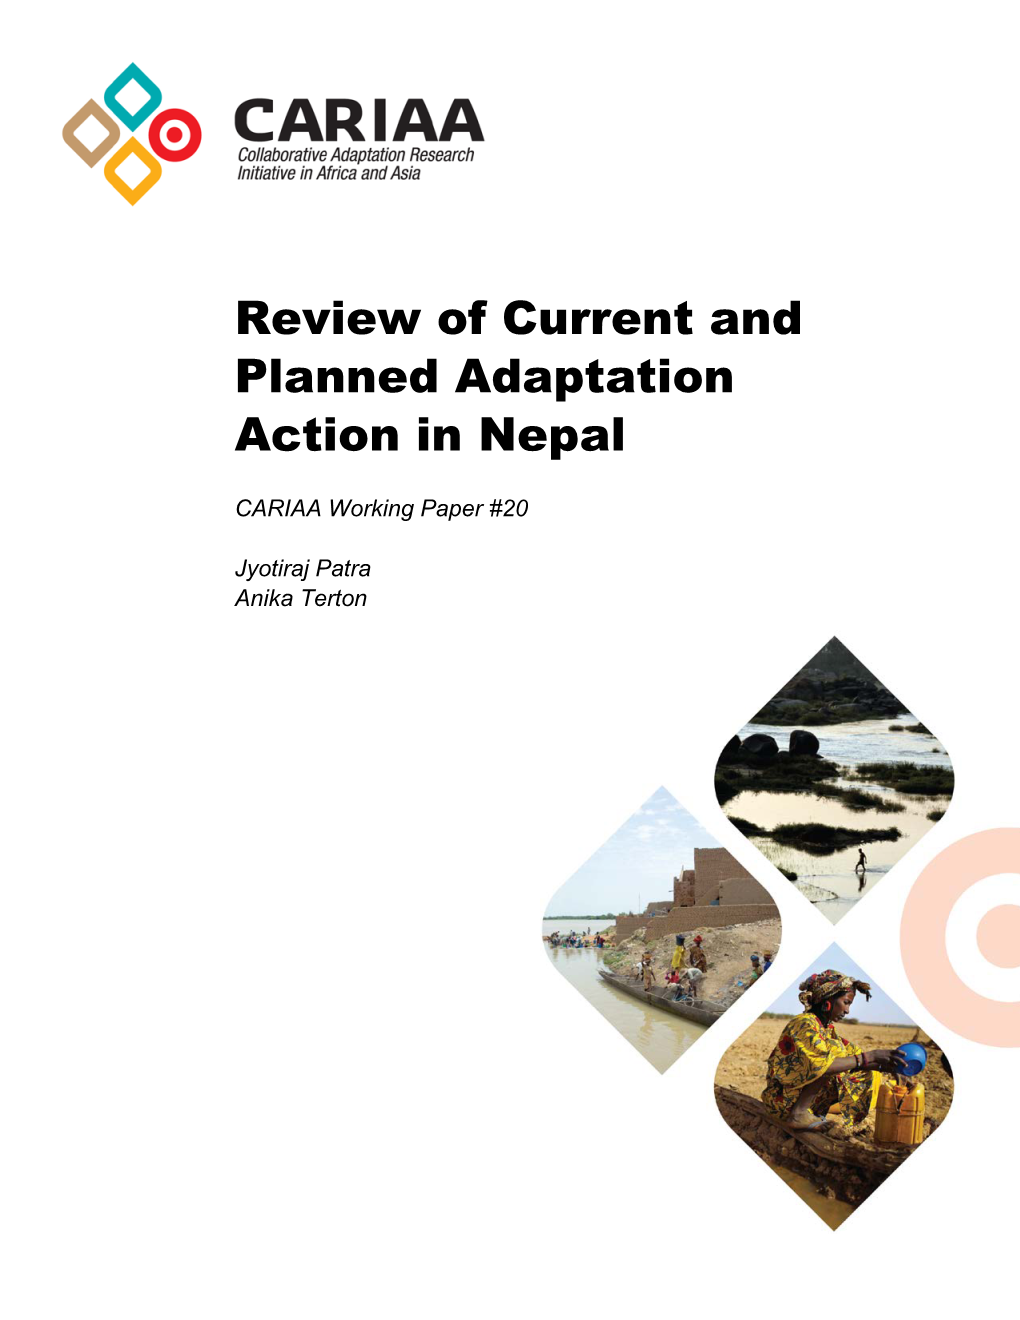 Review of Current and Planned Adaptation Action in Nepal